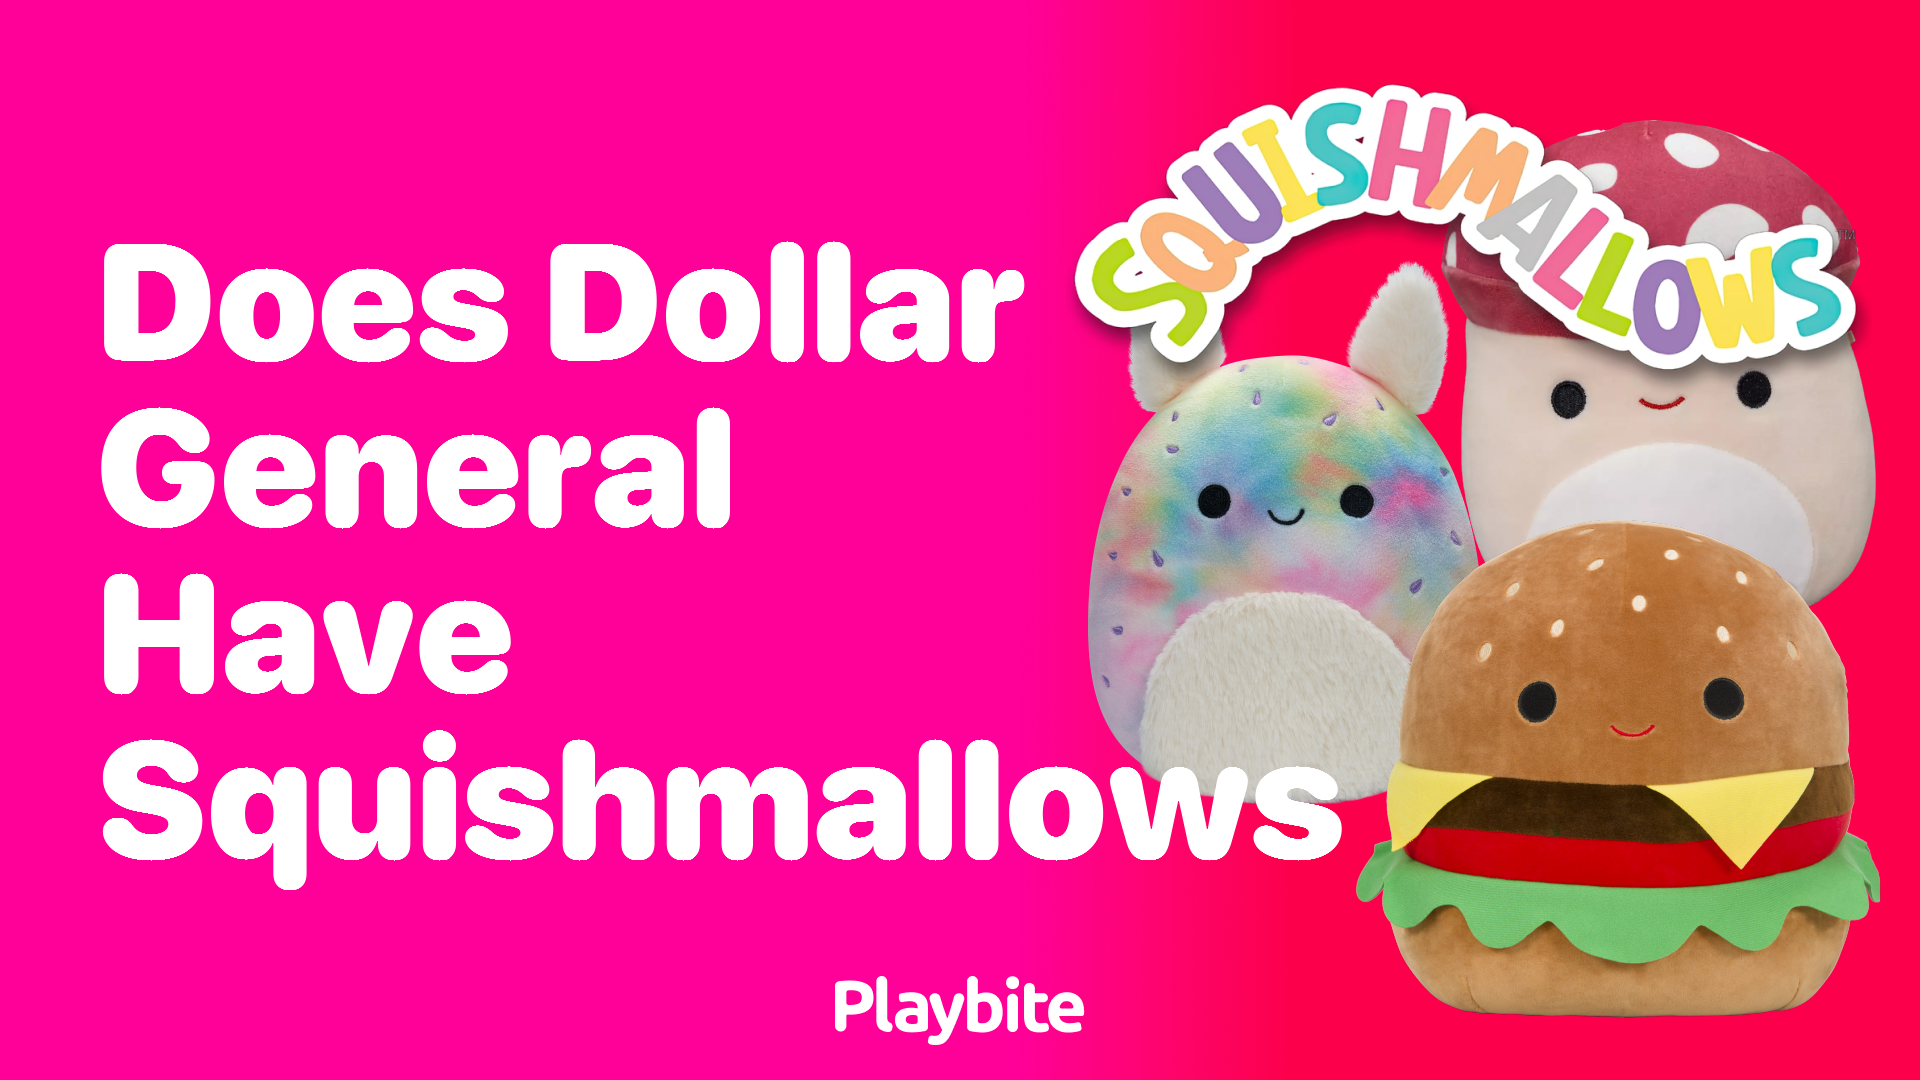 Does Dollar General Have Squishmallows? Find Out Here!